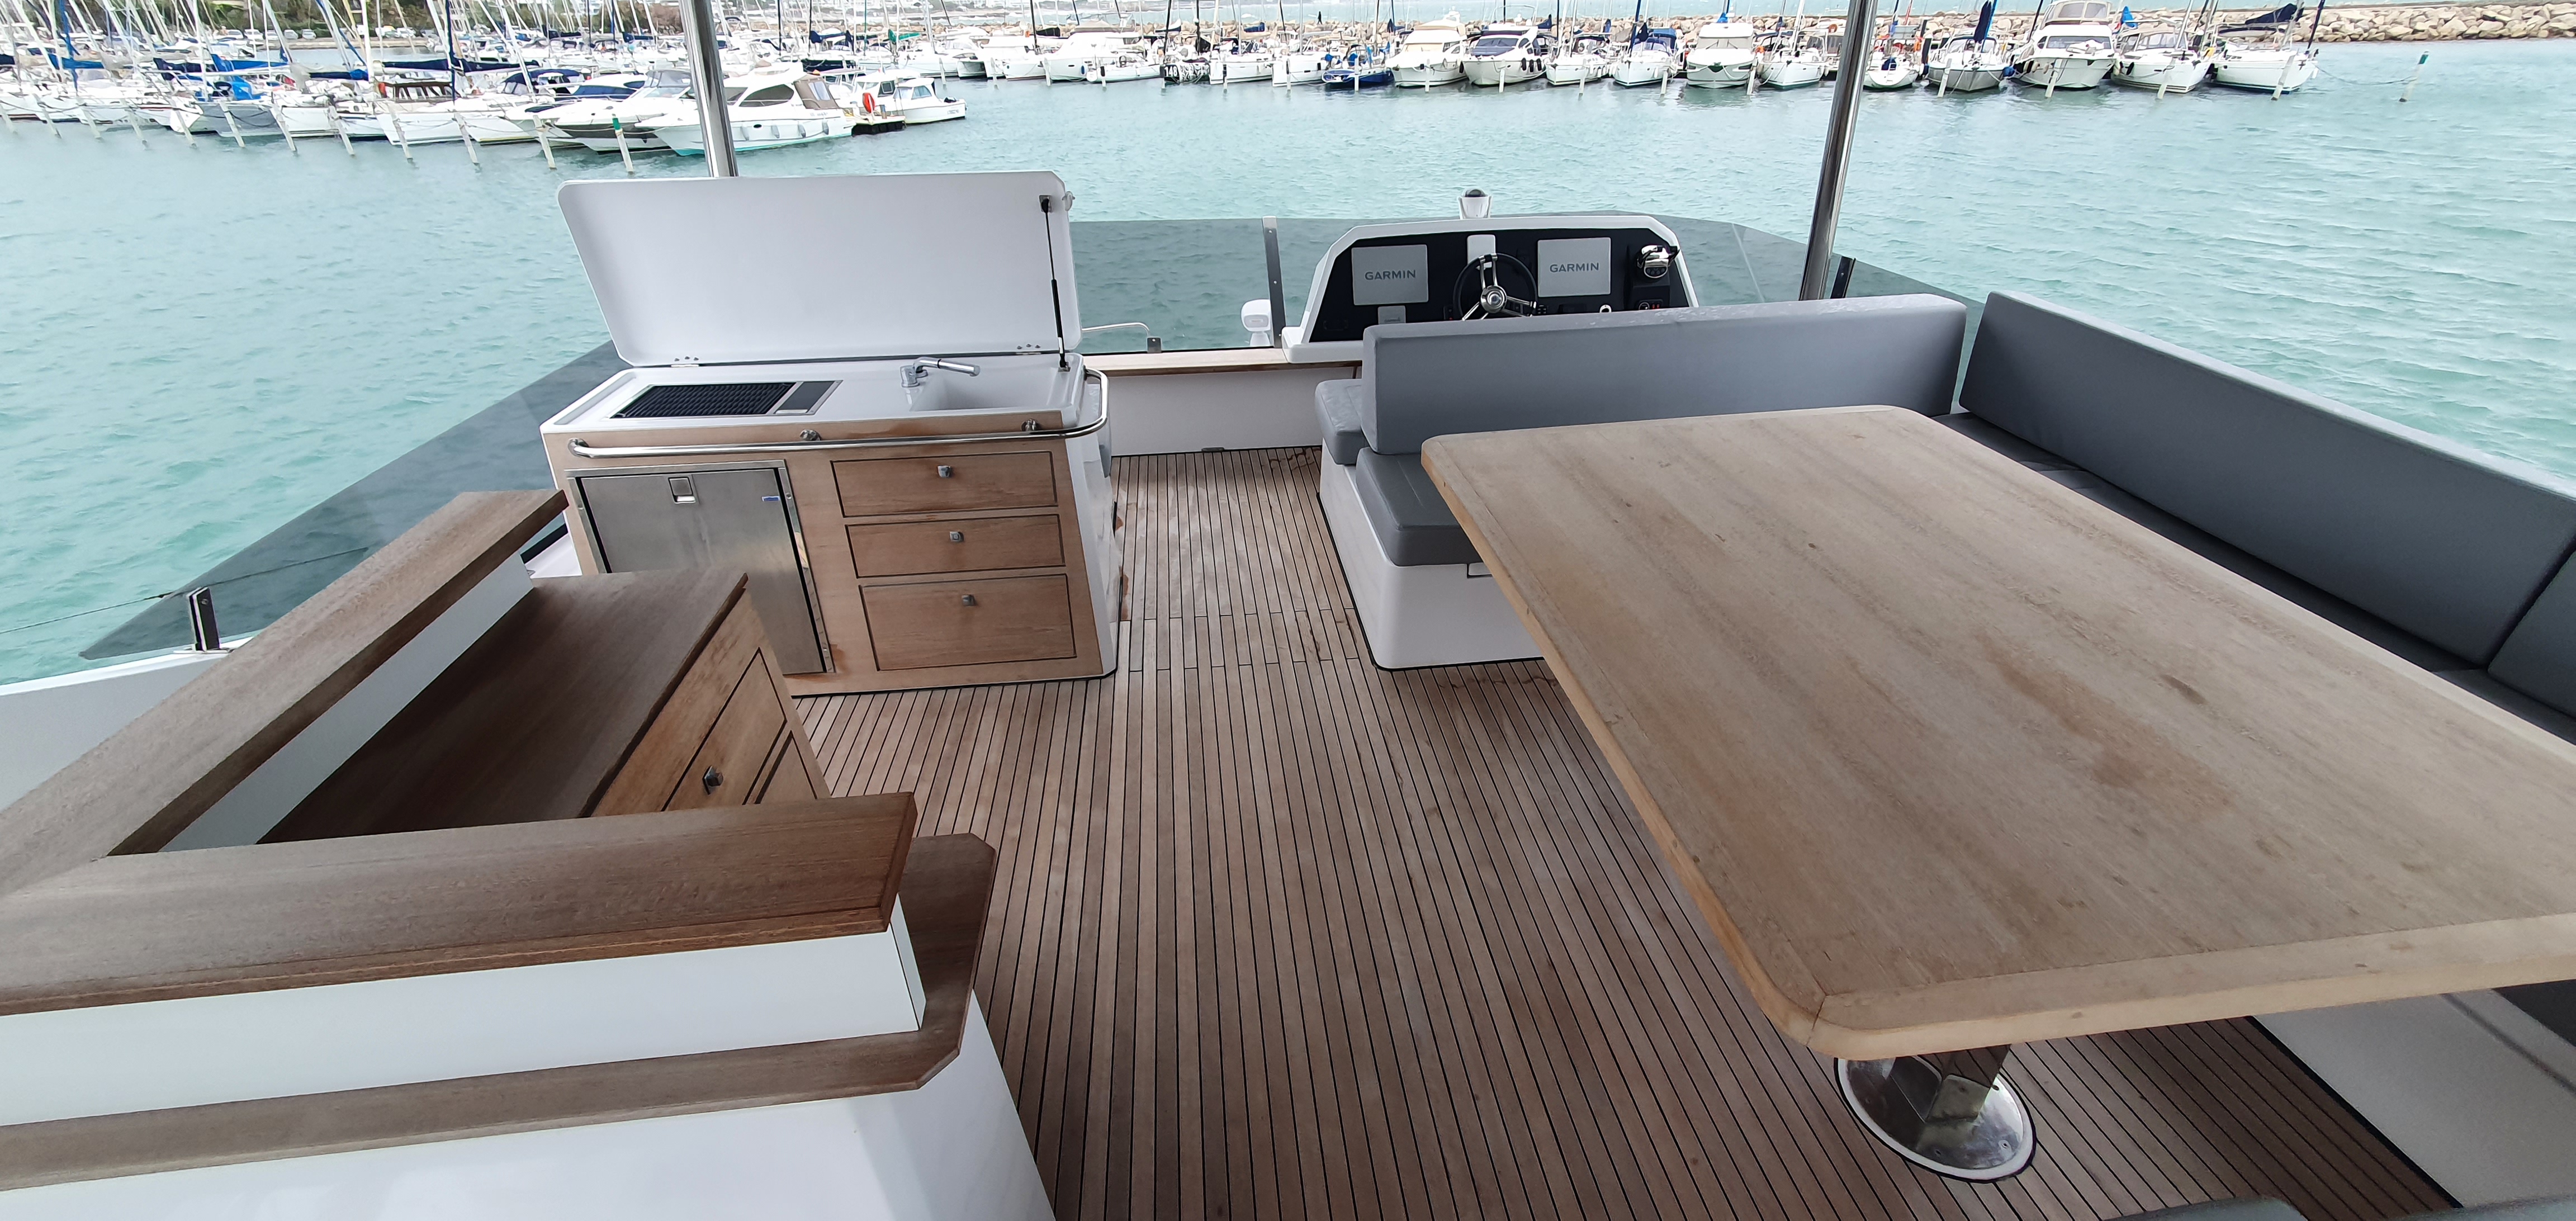 Aventura 50 MY - Yacht Charter France & Boat hire in France French Riviera Hyeres Hyeres 4